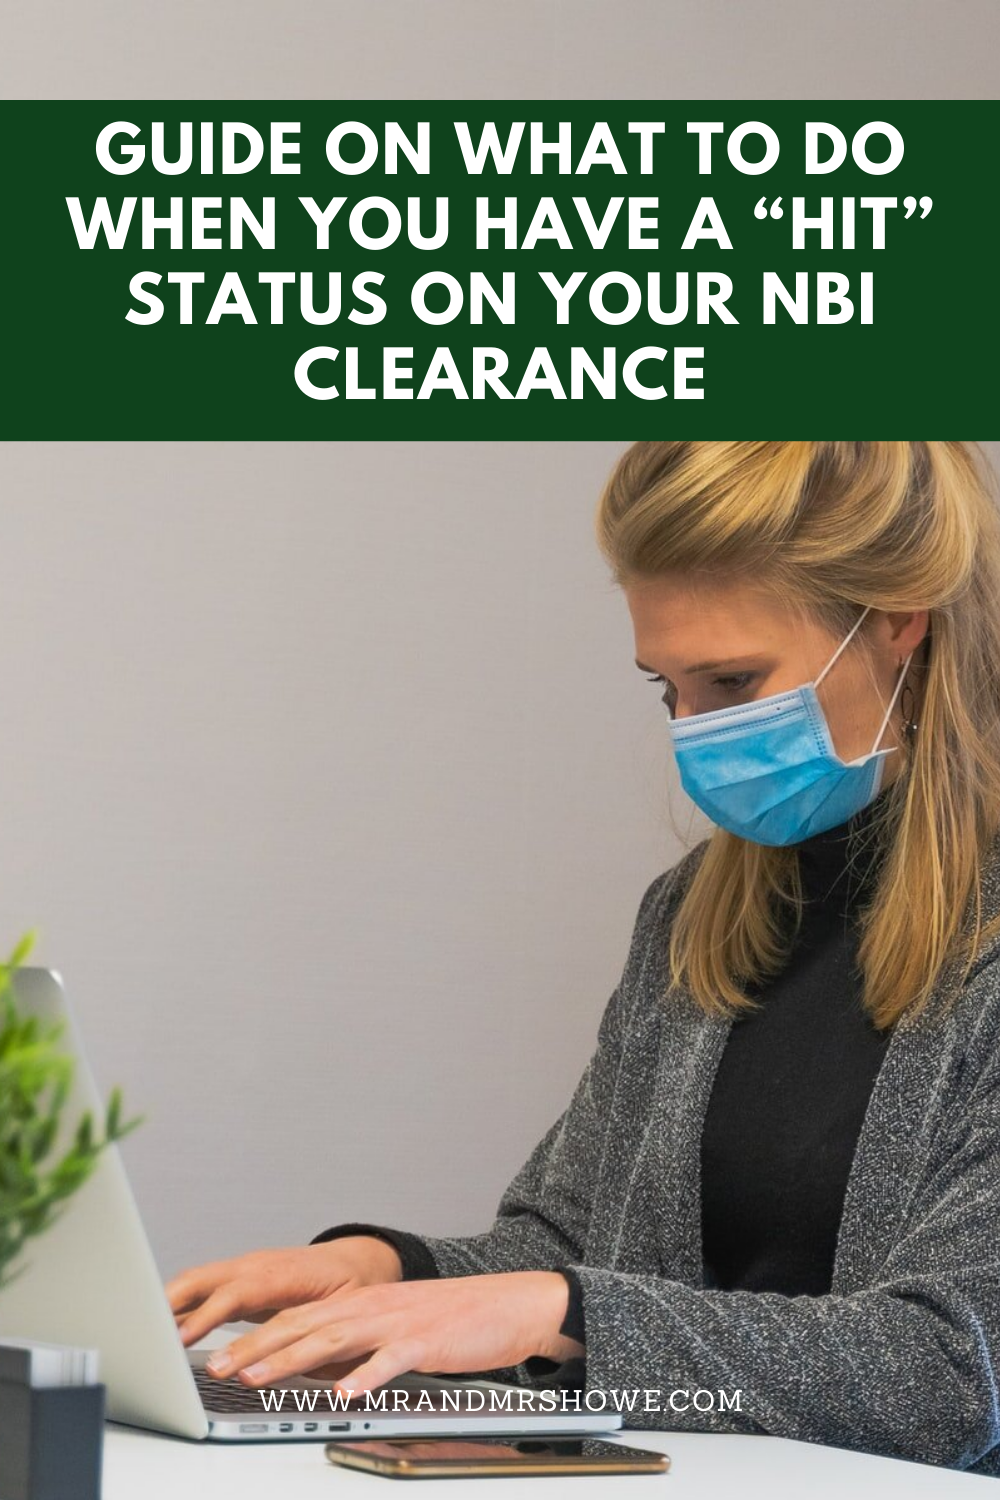 NBI Hit What To Do When You Have A “HIT” Status On Your NBI Clearance1.png